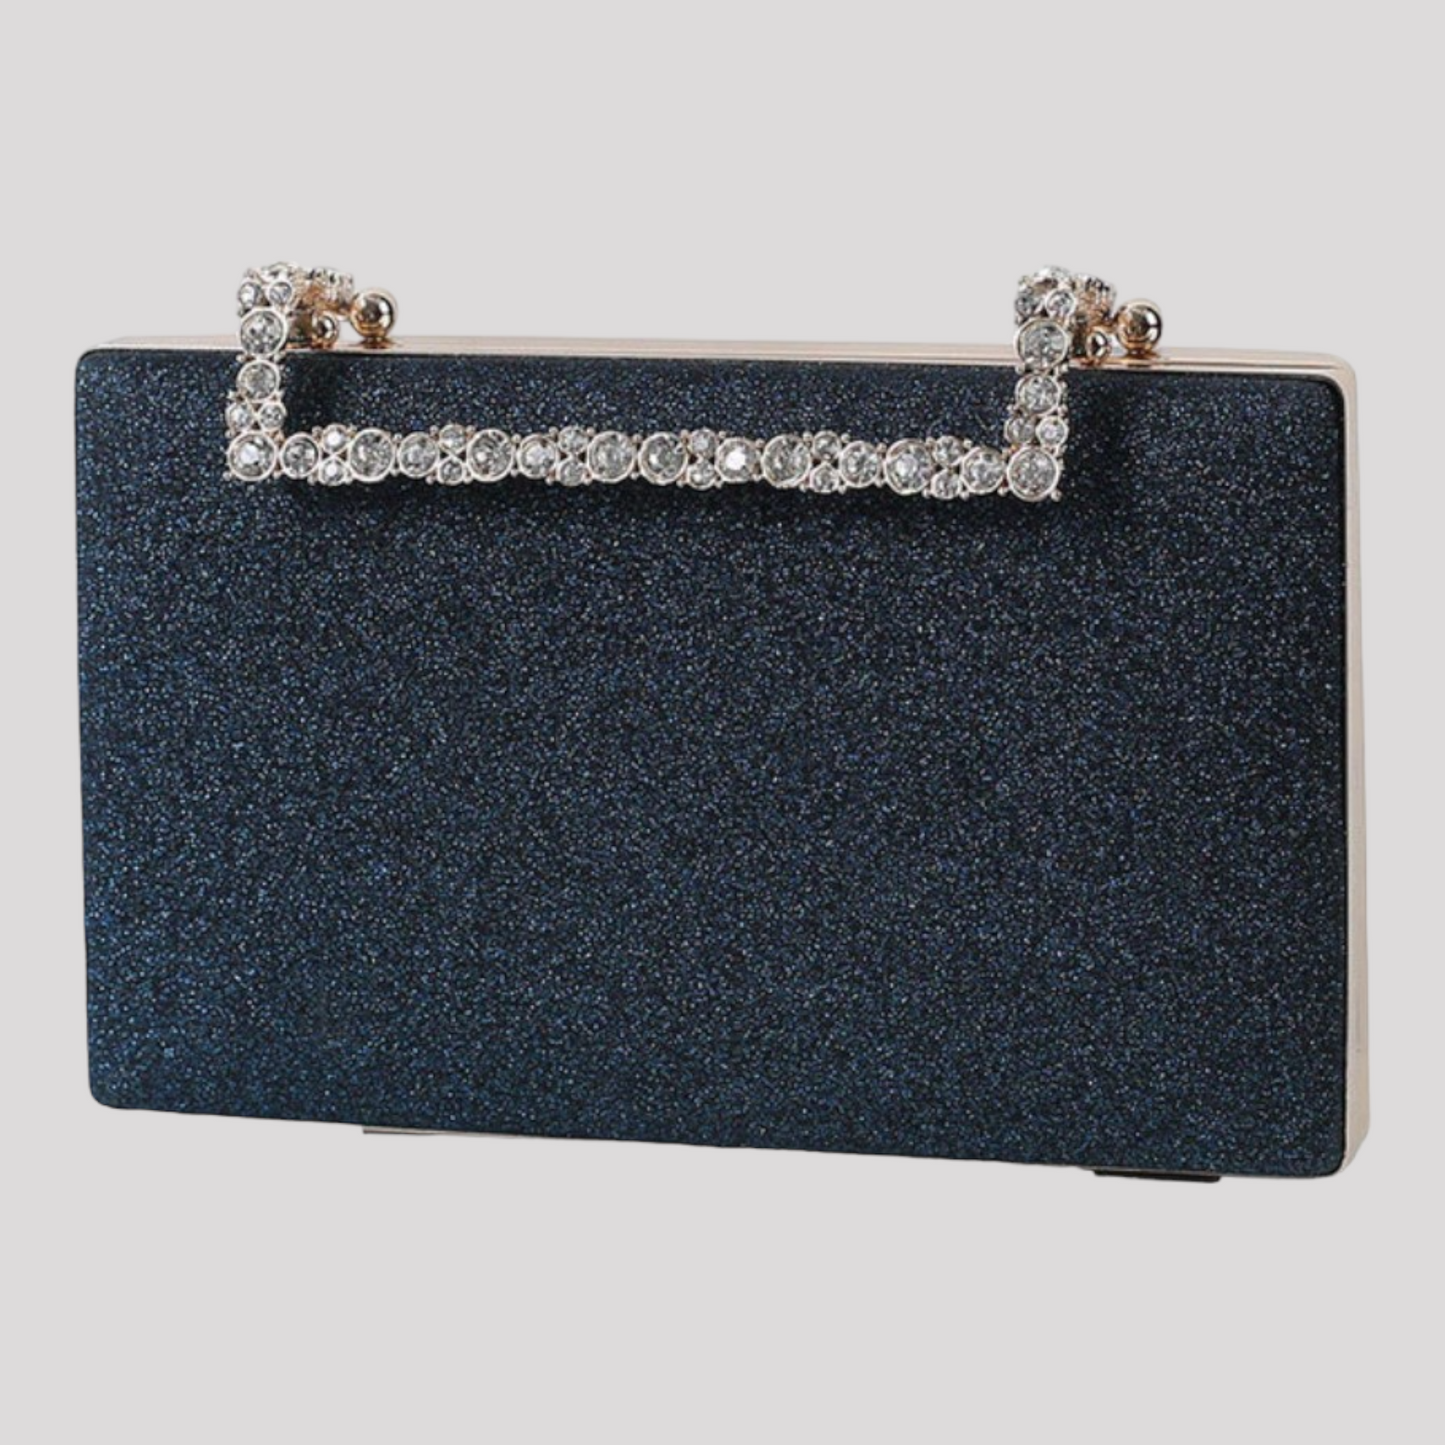 Crystal Handle Evening Clutch Bag available in 9 Colours